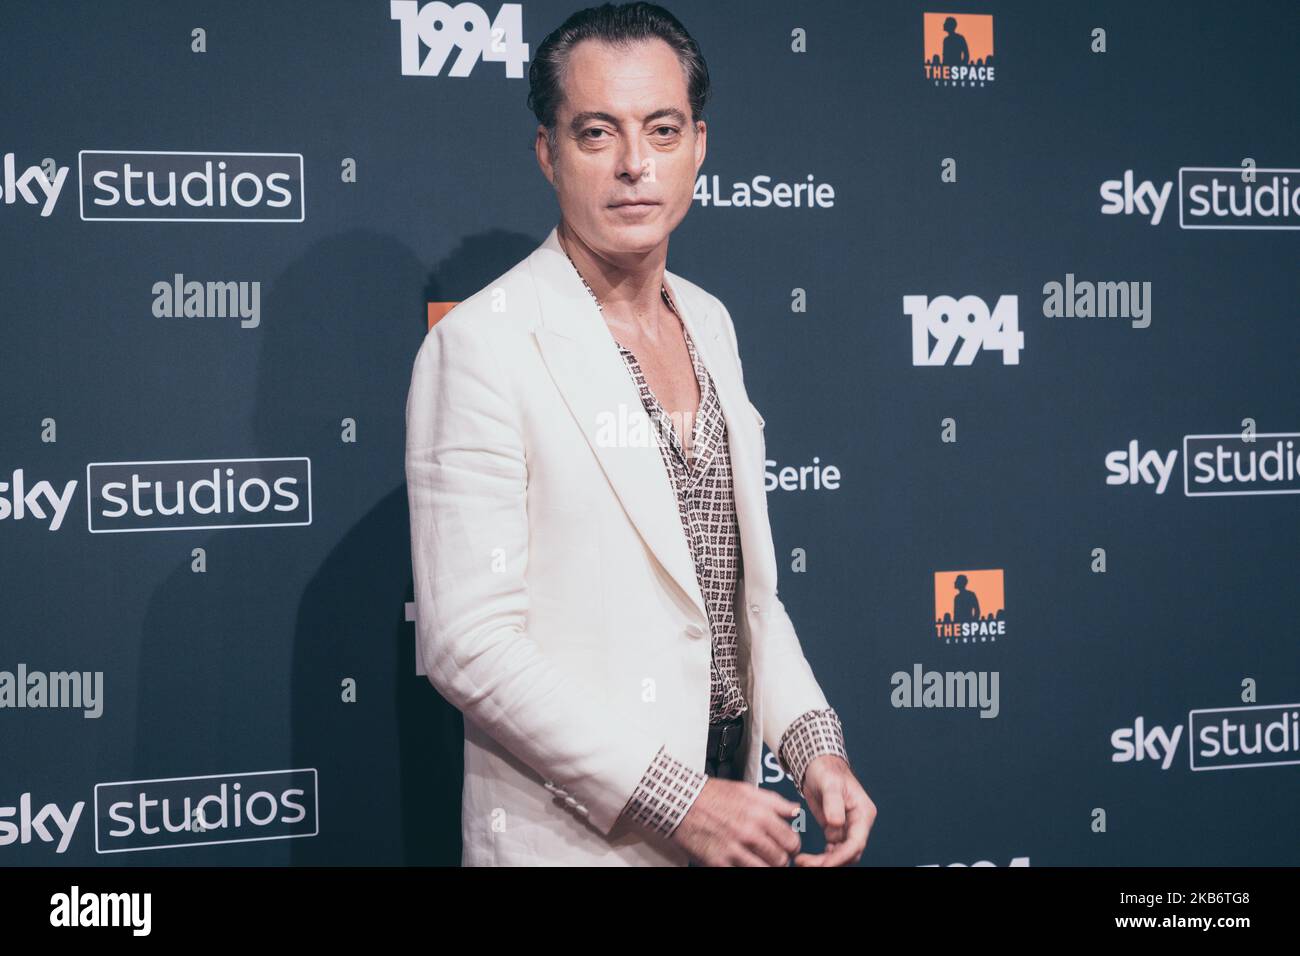 Actor Maurizio Lombardi attends the '1994' Tv Movie photocall at The Space Moderno on September 24, 2019 in Rome, Italy. (Photo by Luca Carlino/NurPhoto) Stock Photo